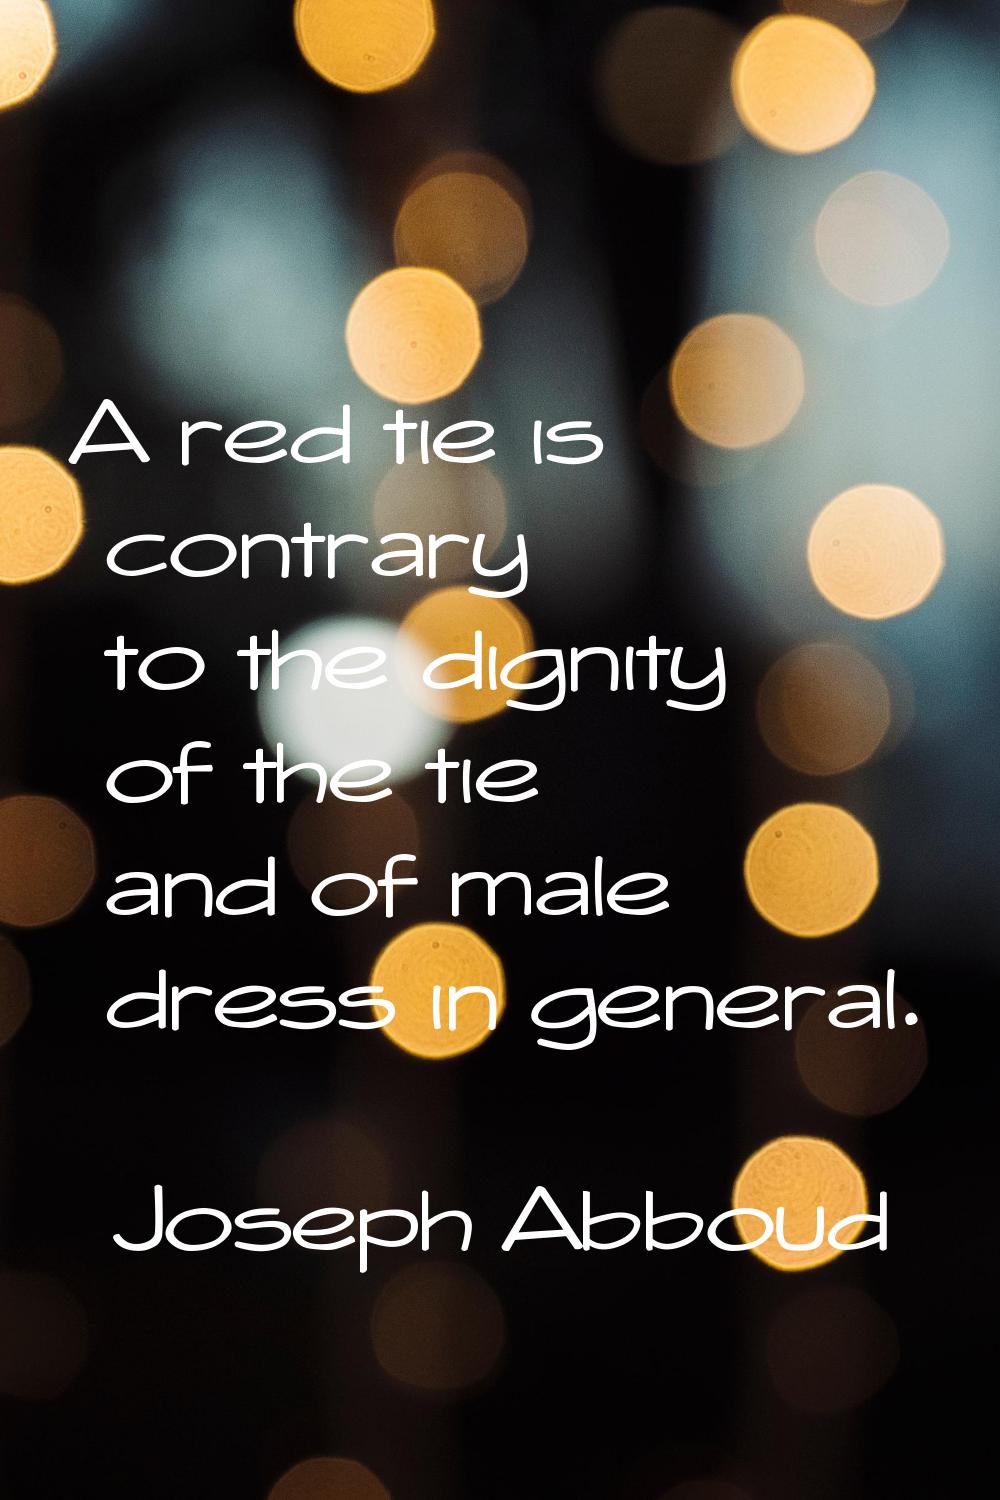 A red tie is contrary to the dignity of the tie and of male dress in general.